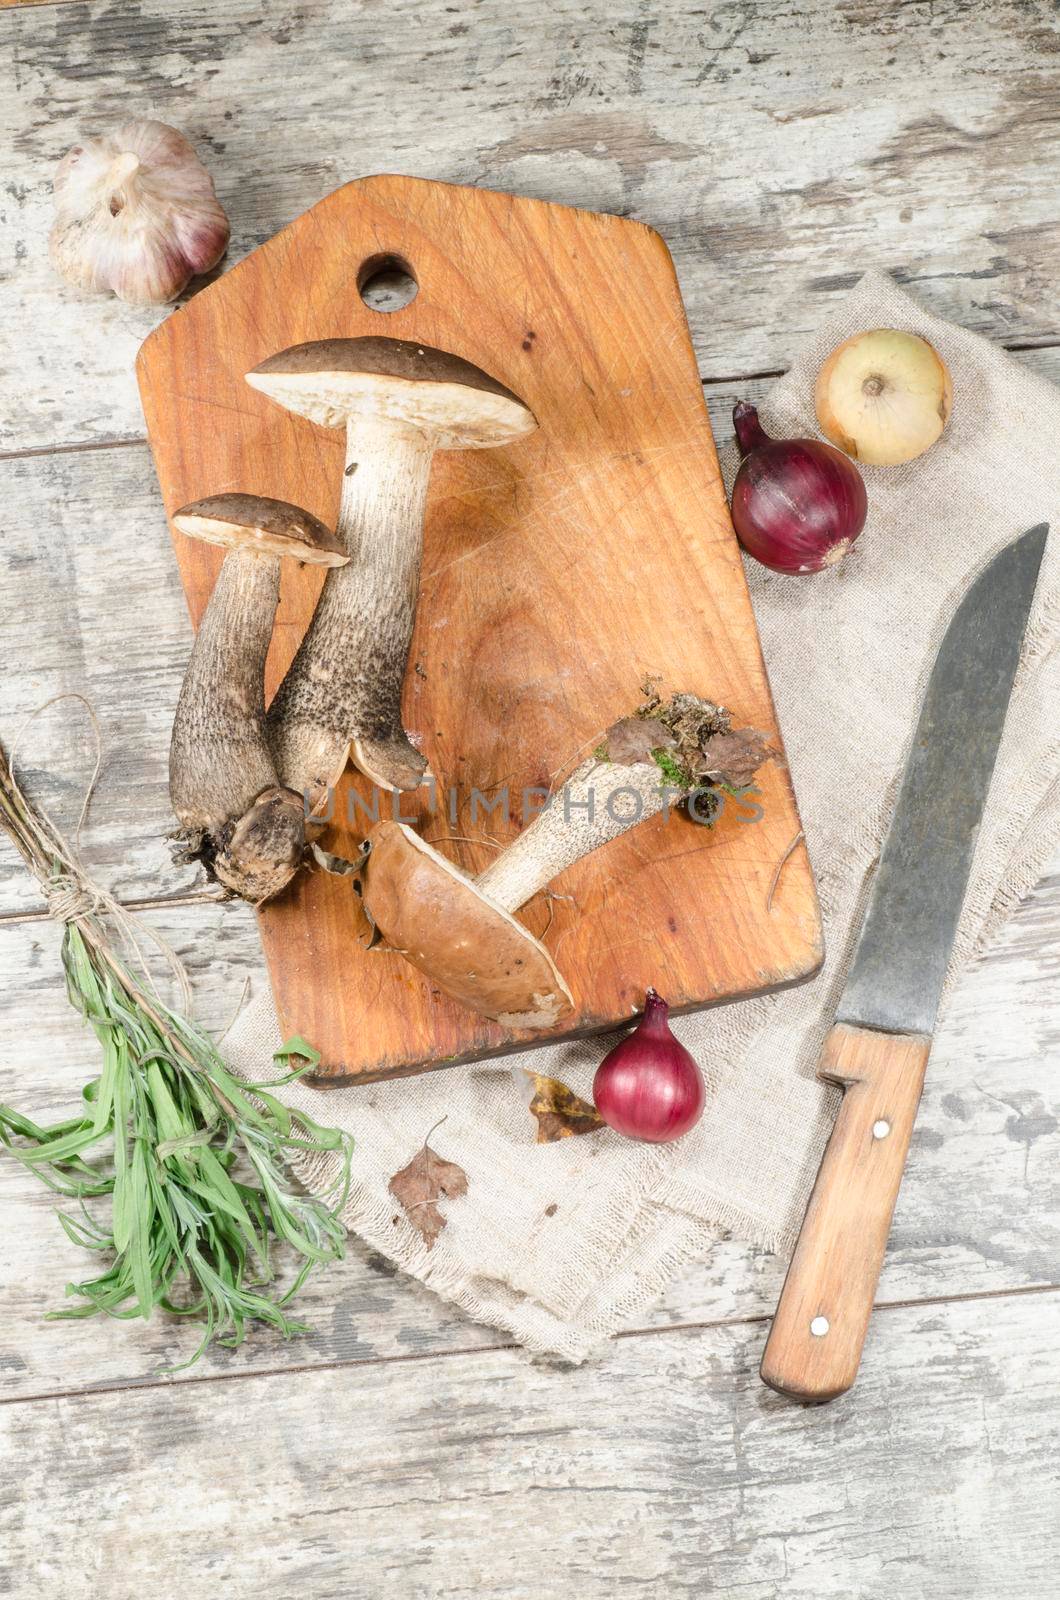 Wild mushrooms on cutting board. From the series "Mushrooms in our kitchen"